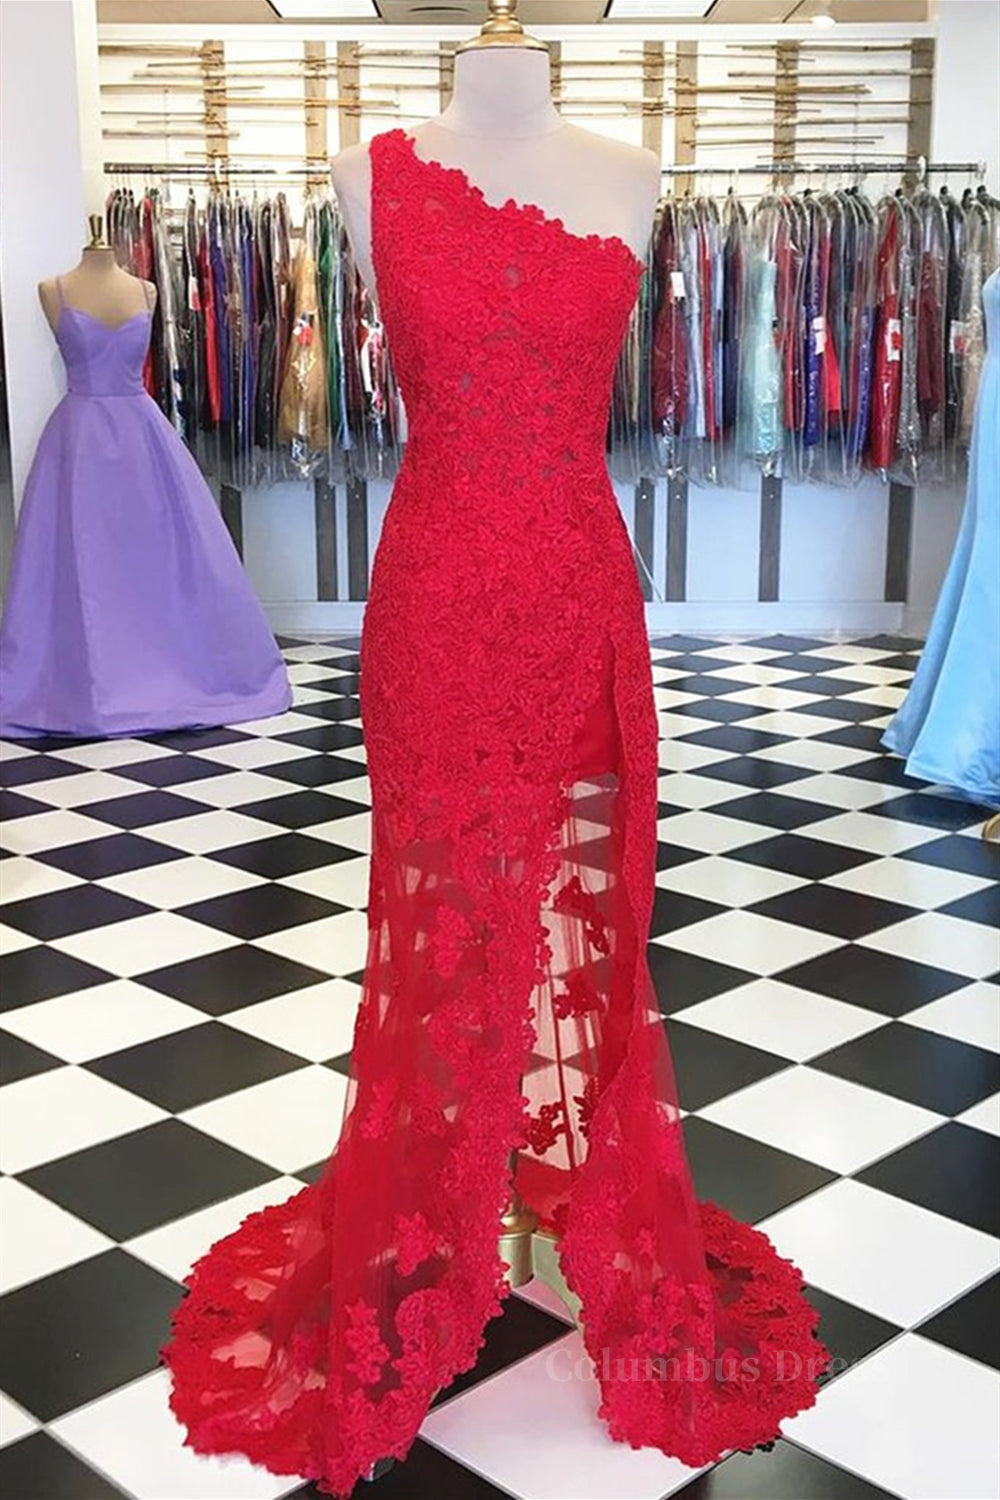 Fall Wedding, One Shoulder Mermaid Red Lace Long Prom Dresses with High Slit